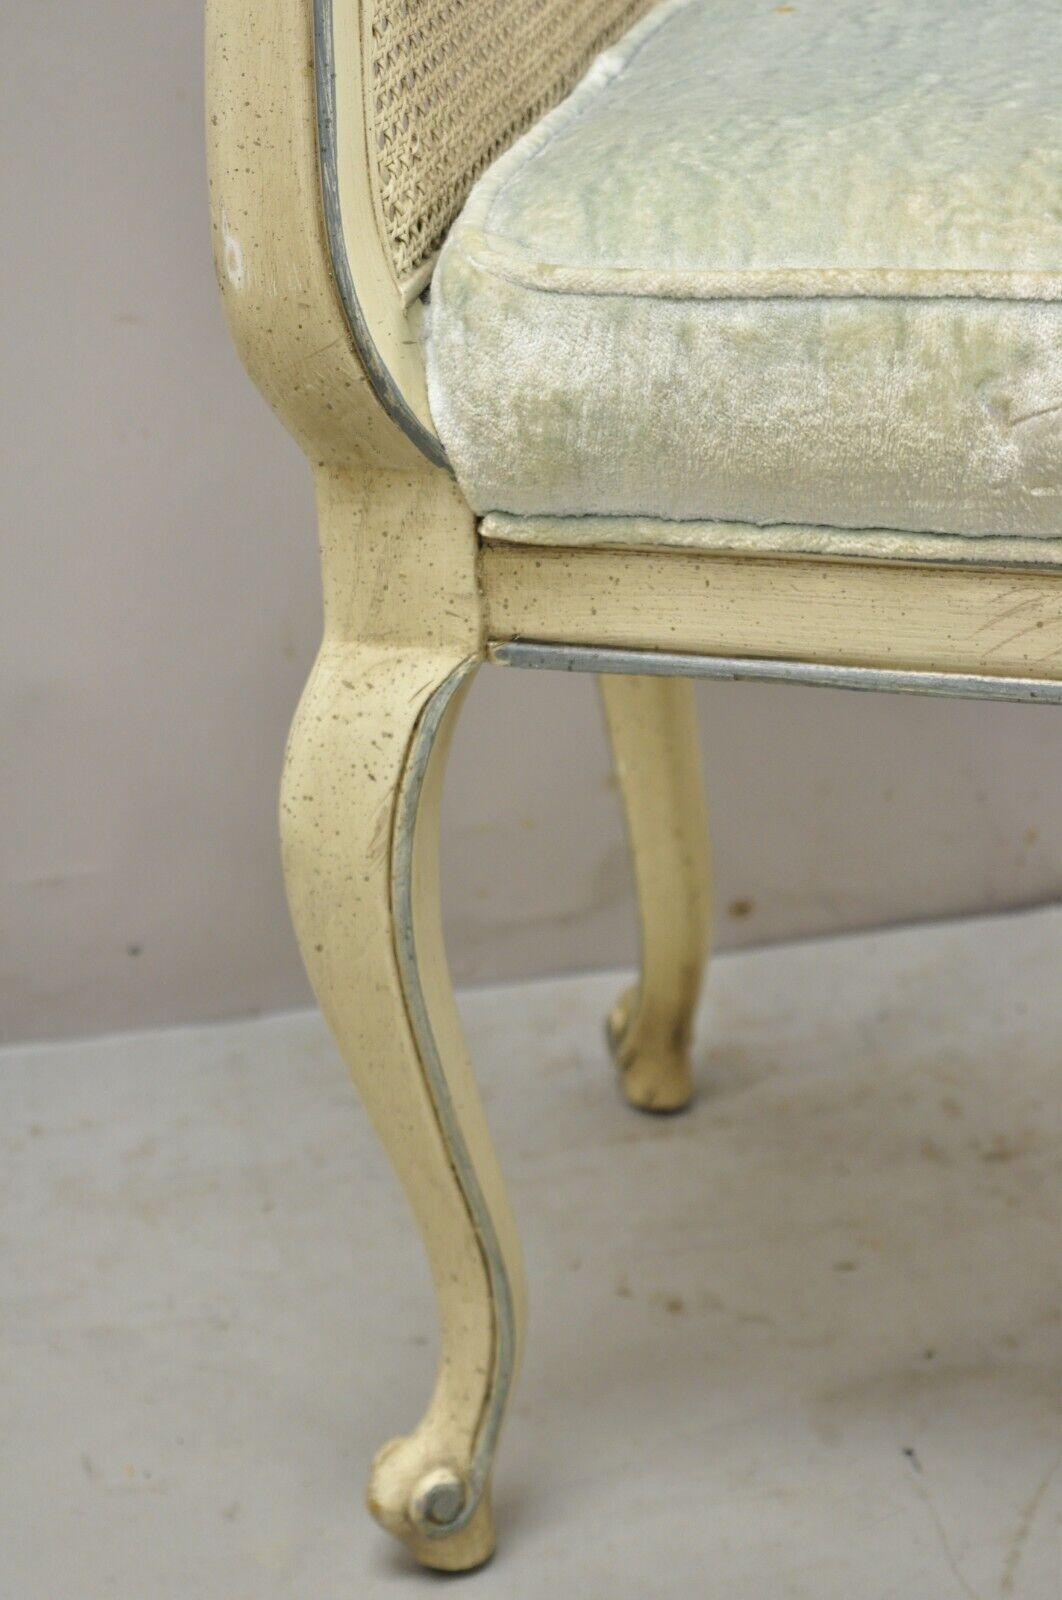 Wood Vtg French Provincial Style Cream Painted Cane Cabriole Leg Window Bench w/ Arms